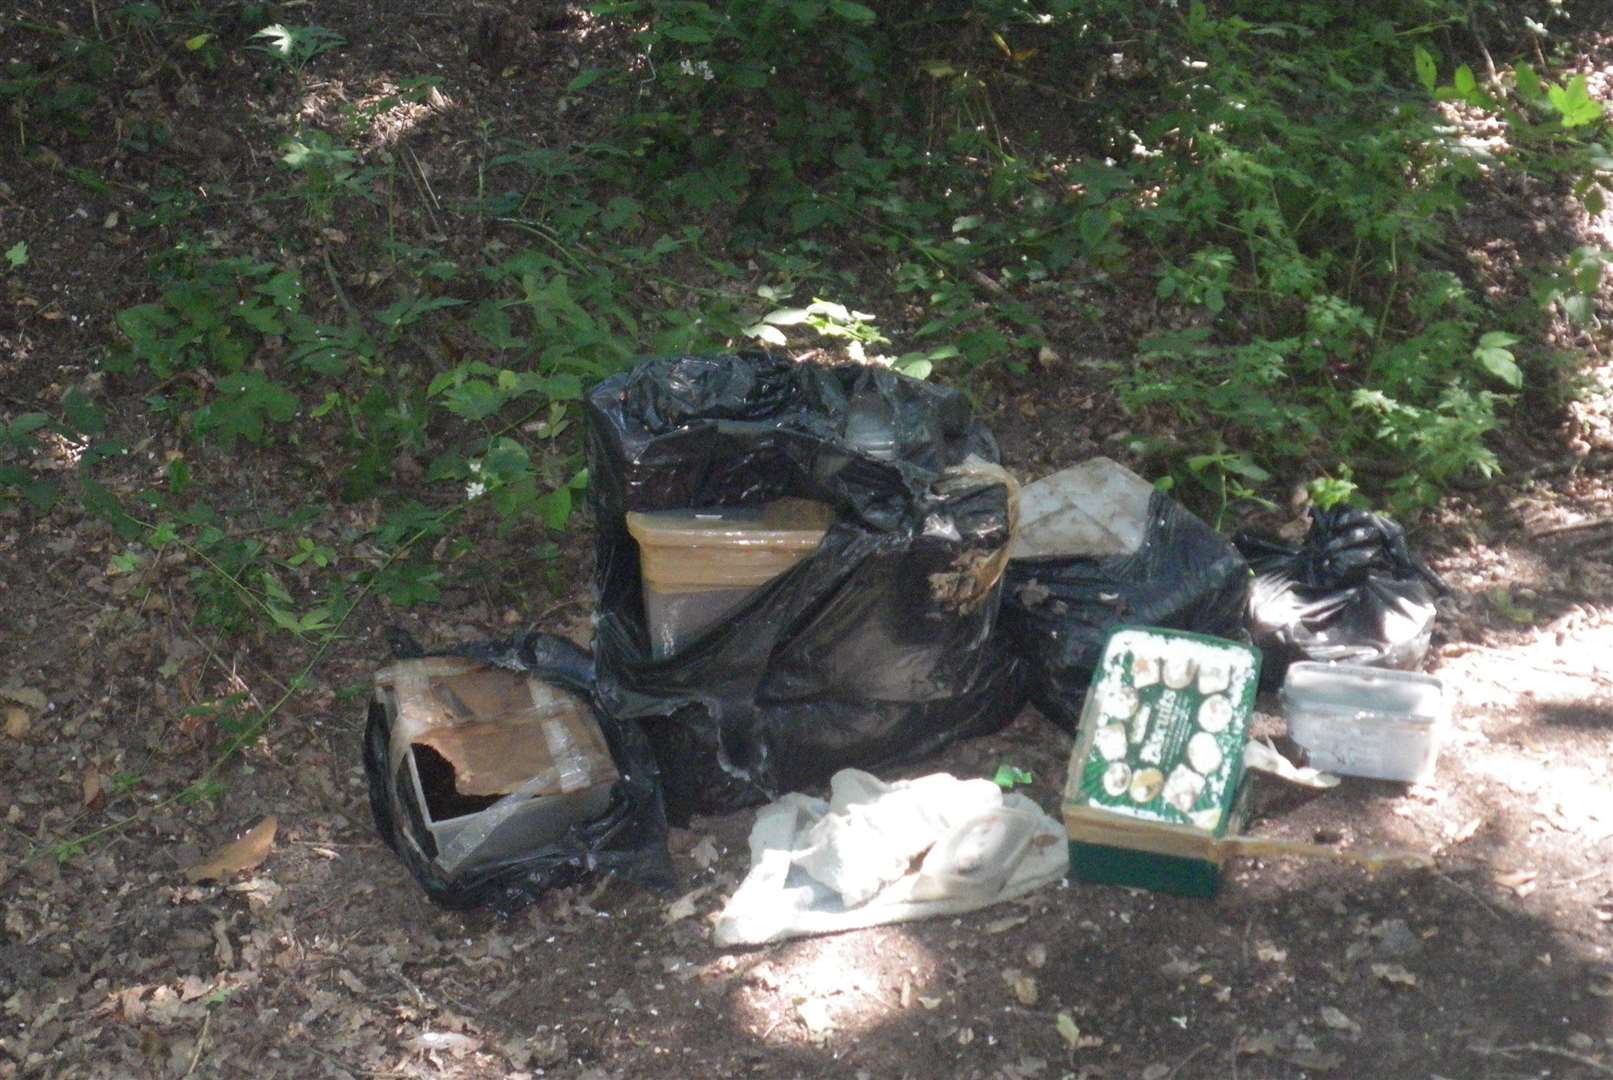 The bodies of 10 dead animals were found in sealed boxes in Pembury, in early July